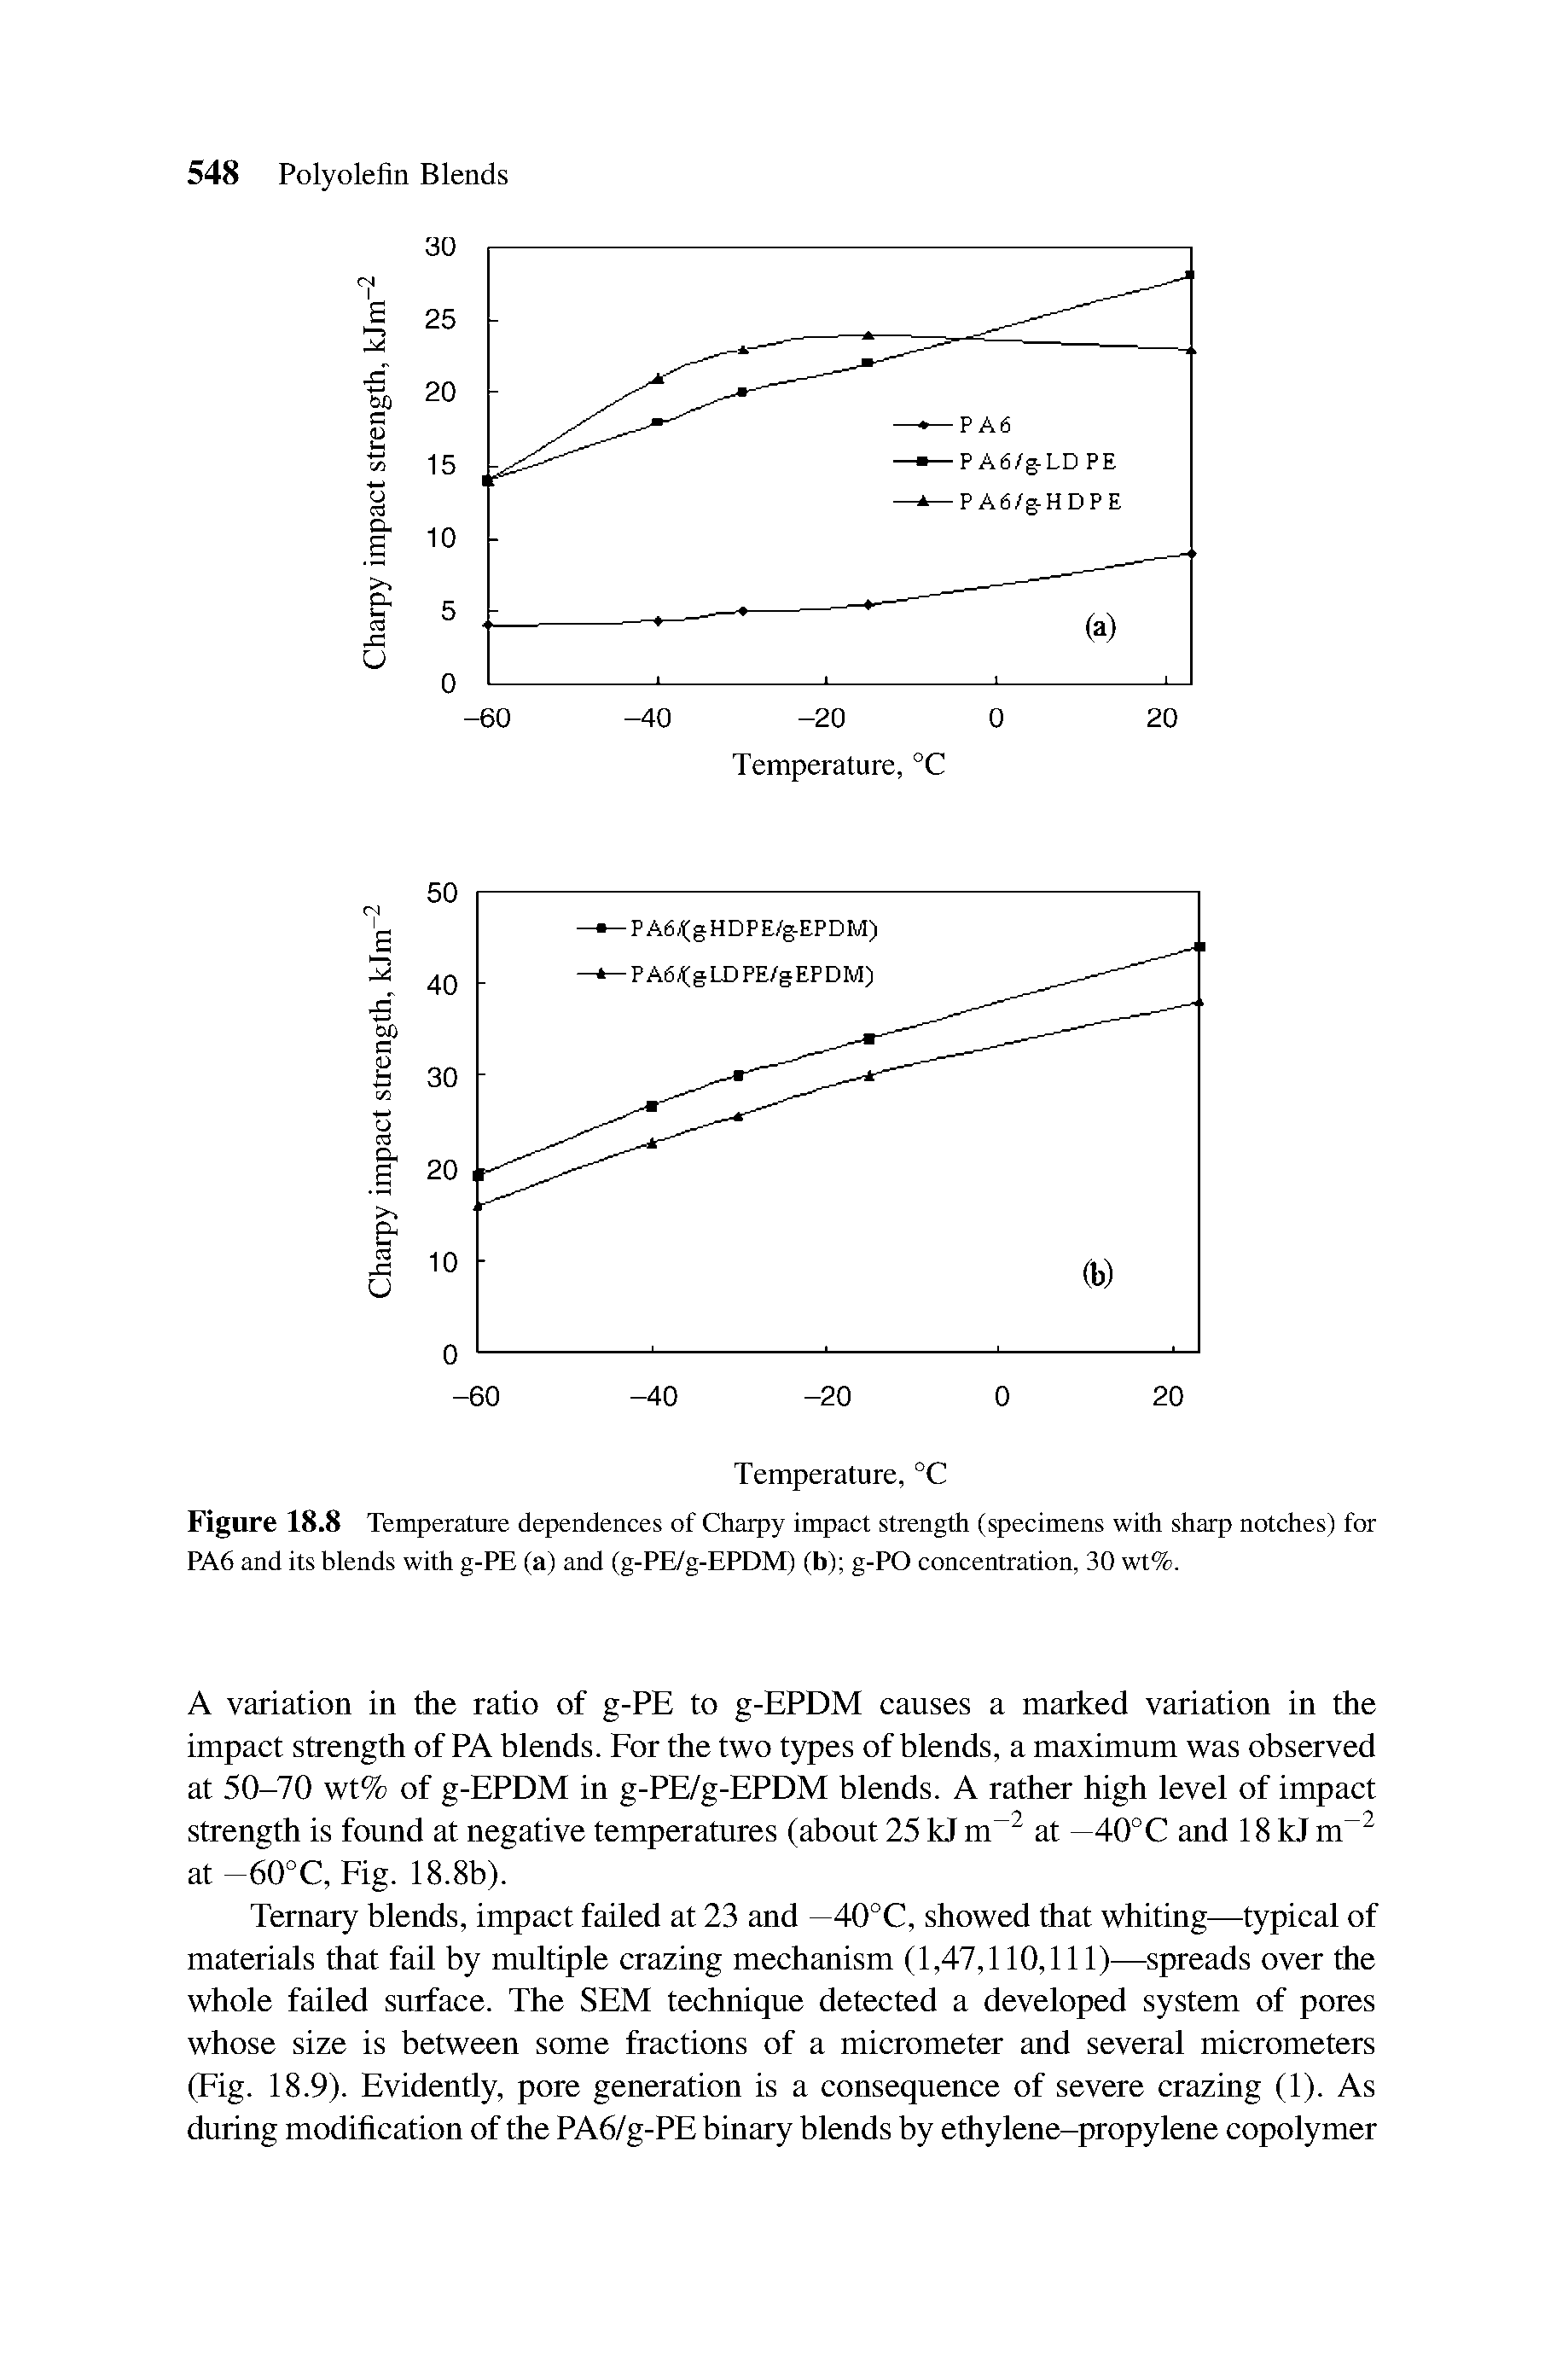 Figure 18.8 Temperature dependences of Charpy impact strength (specimens with sharp notches) for PA6 and its blends with g-PE (a) and (g-PE/g-EPDM) (b) g-PO concentration, 30 wt%.